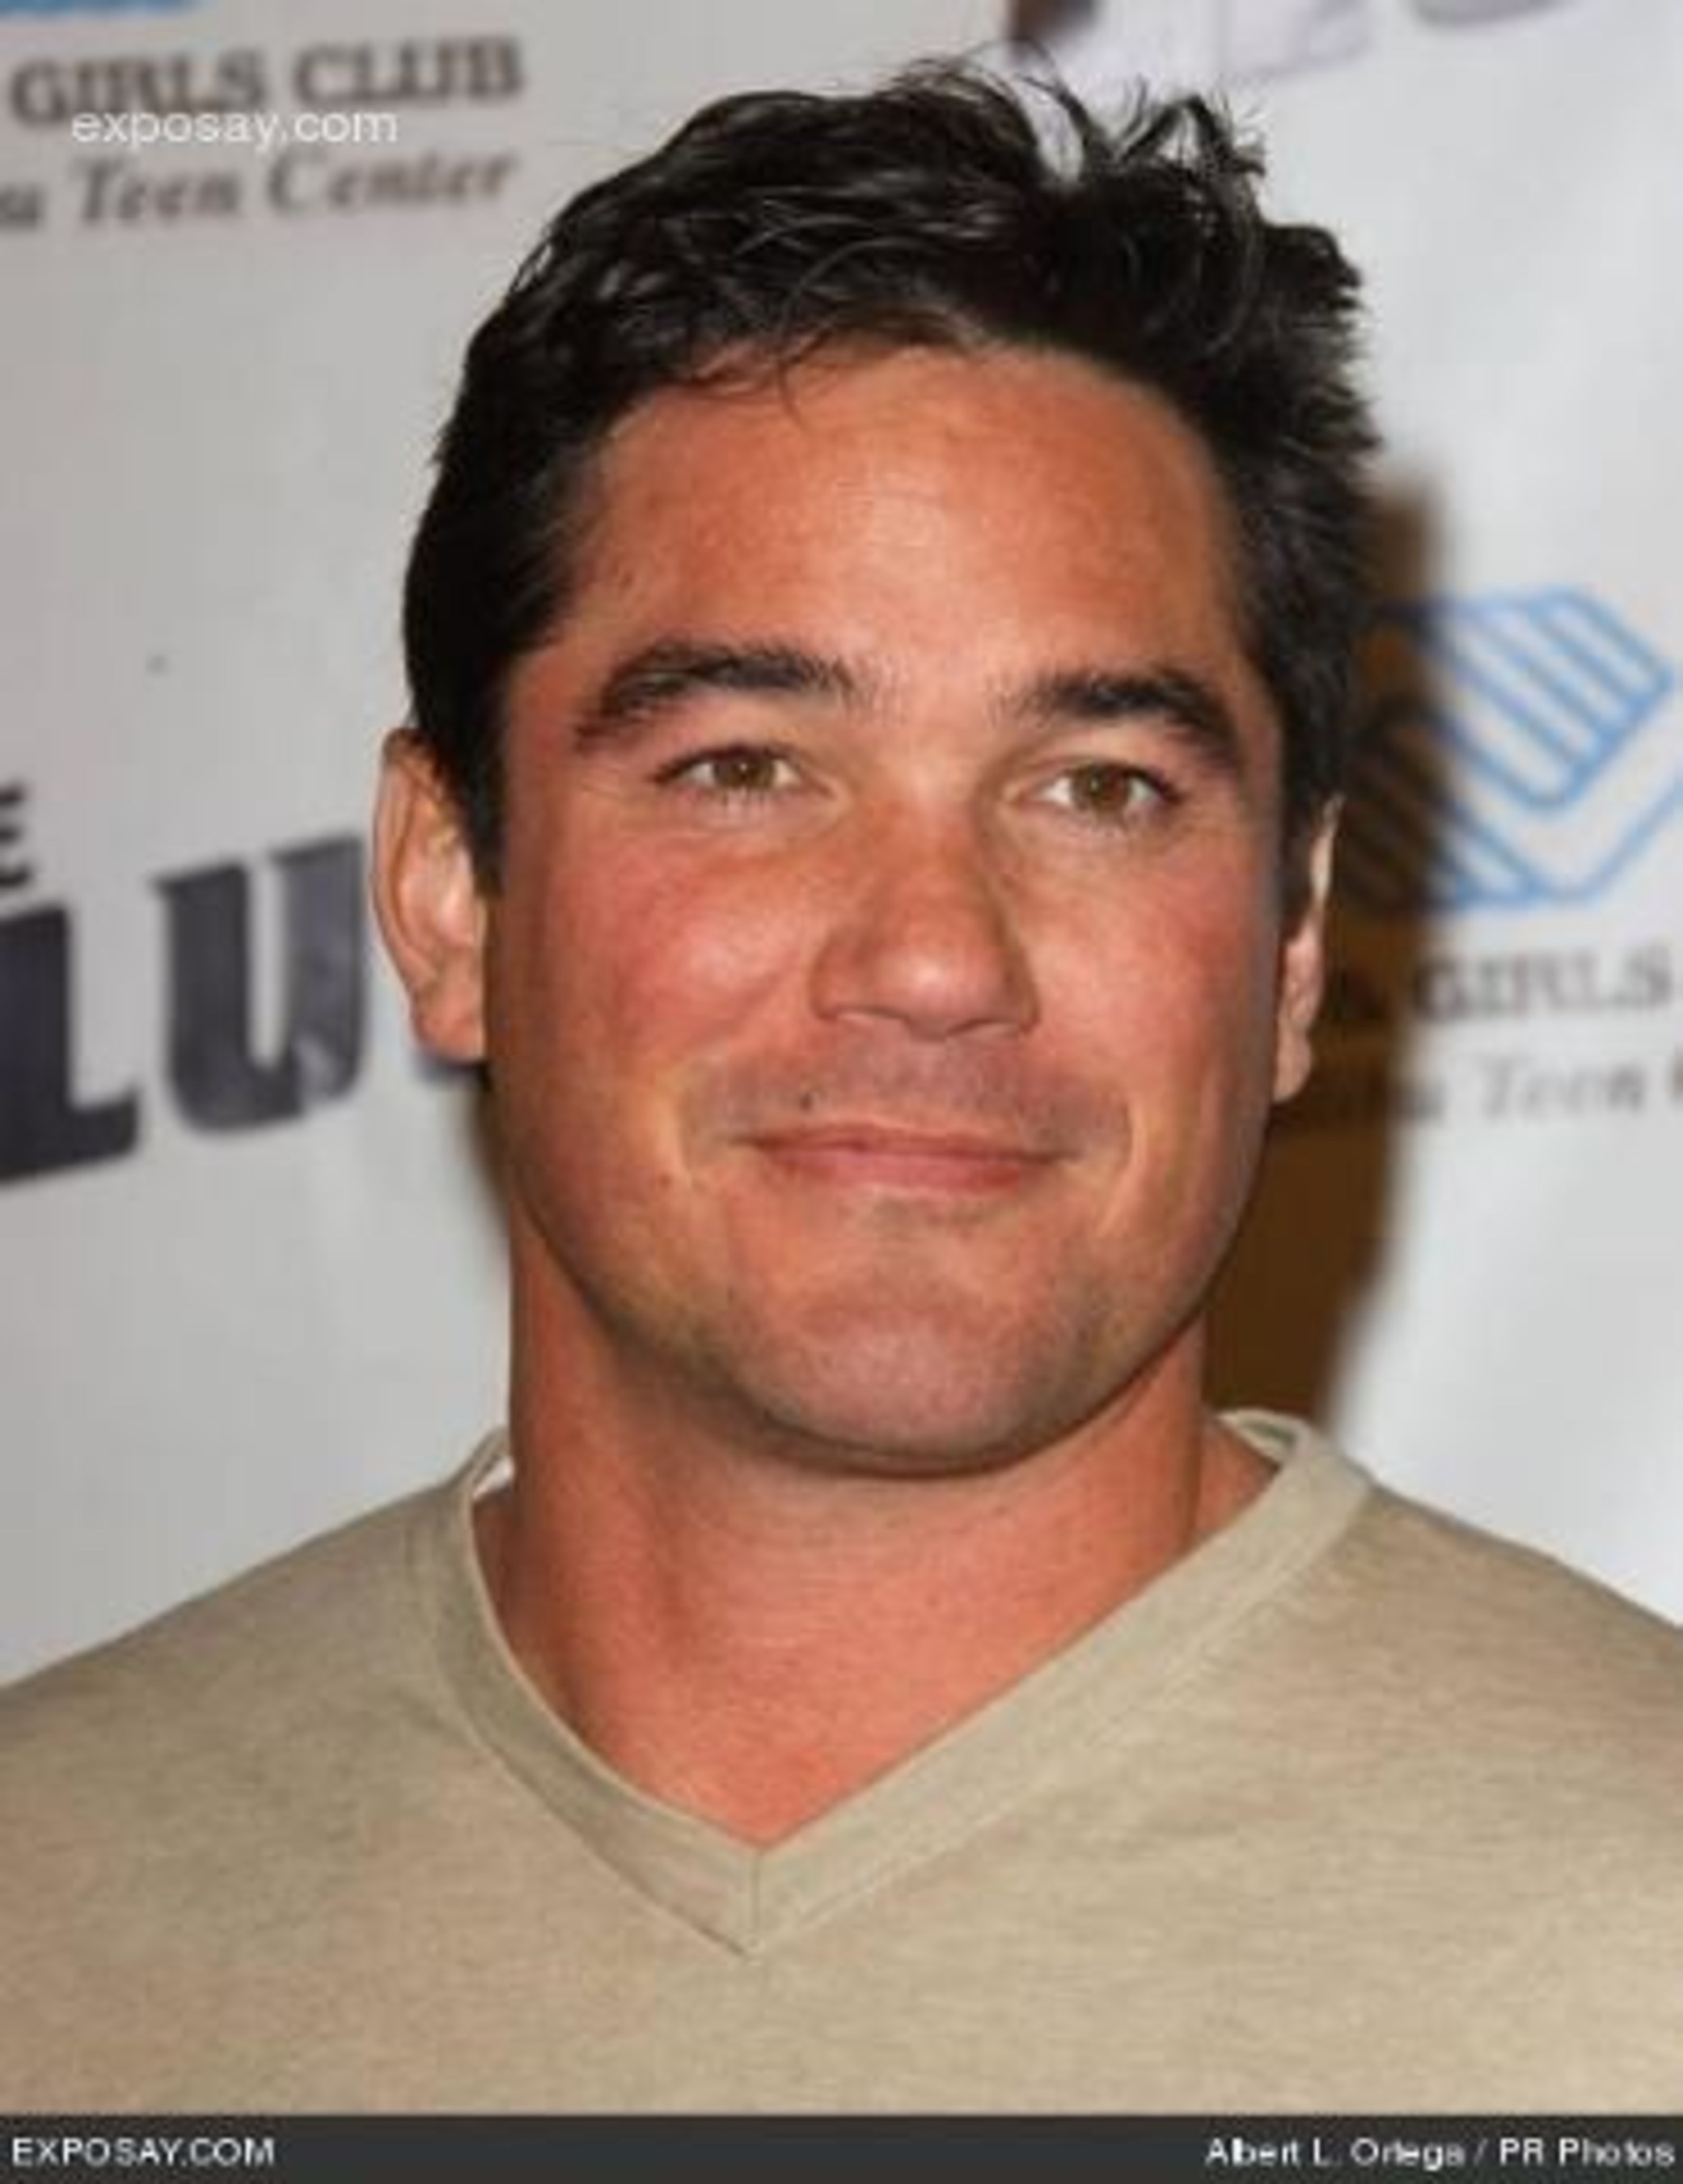 The cast of My Last Christmas includes Dean Cain (Lois & Clark: The New Adventures of Superman), Quinton Aaron (The Blind Side), Shad Gaspard (former WWE superstar), and Q Parker (Grammy award winning singer/songwriter). (PRNewsFoto/Project RACE)